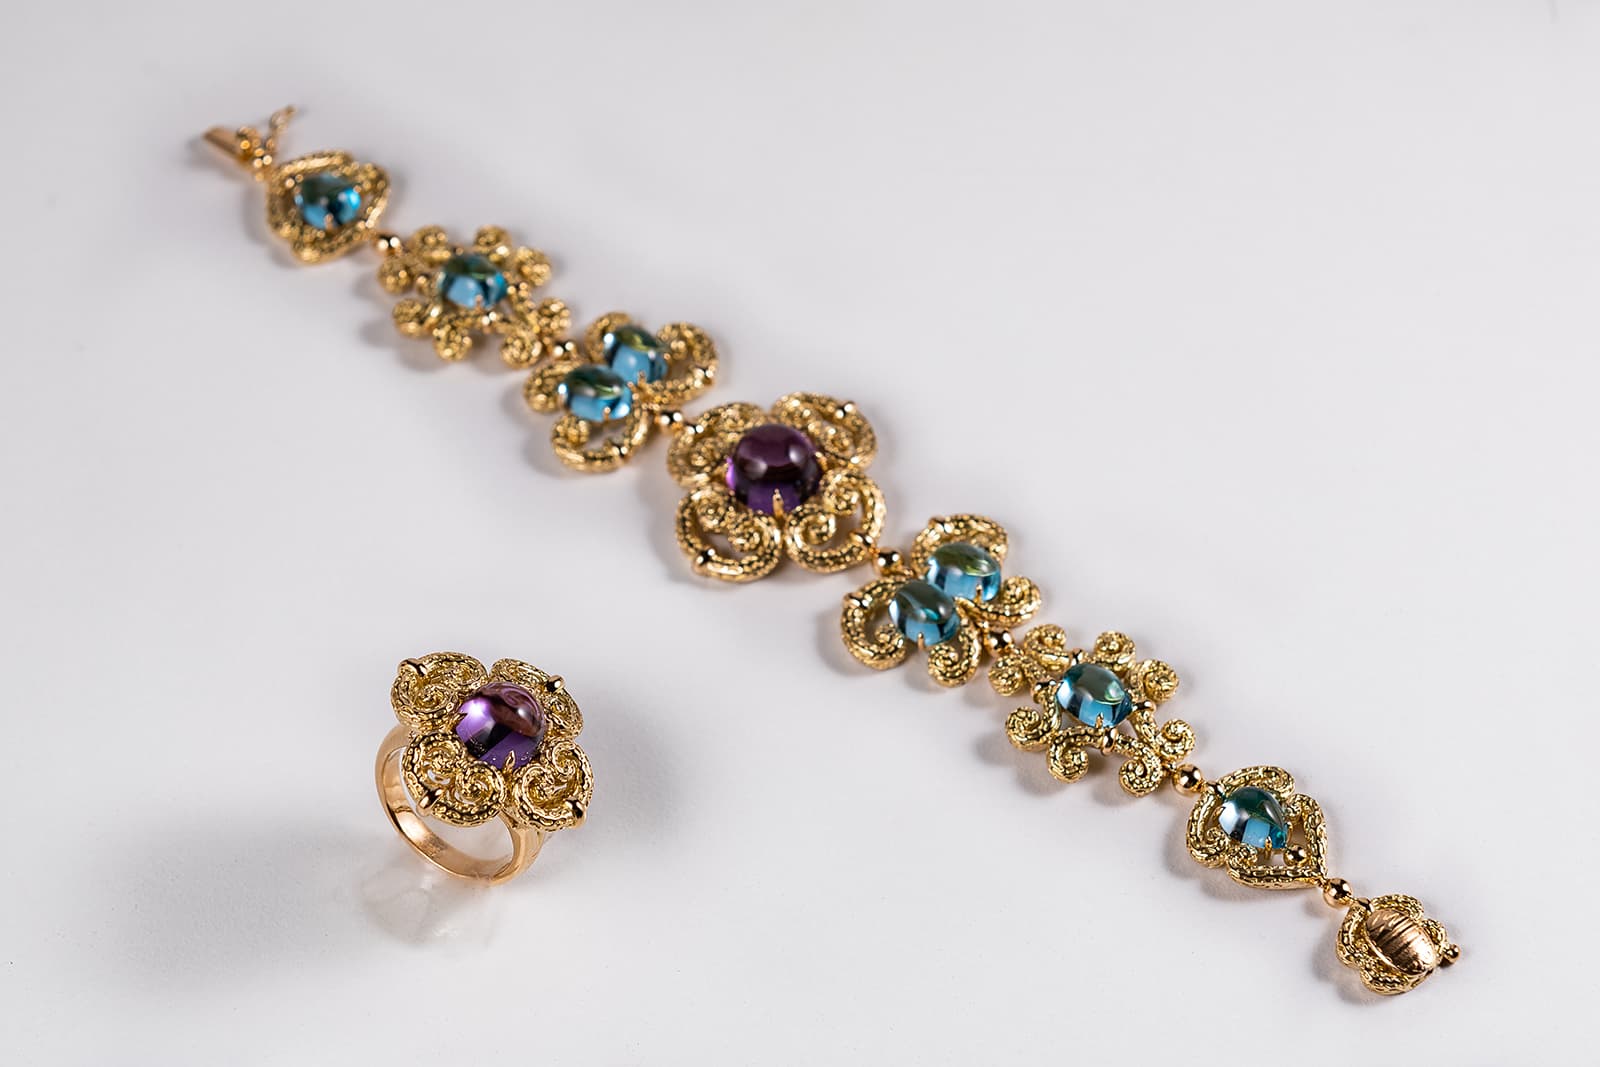 WITR Jewellery bracelet with amethyst and topaz, and ring with amethyst, both in yellow gold